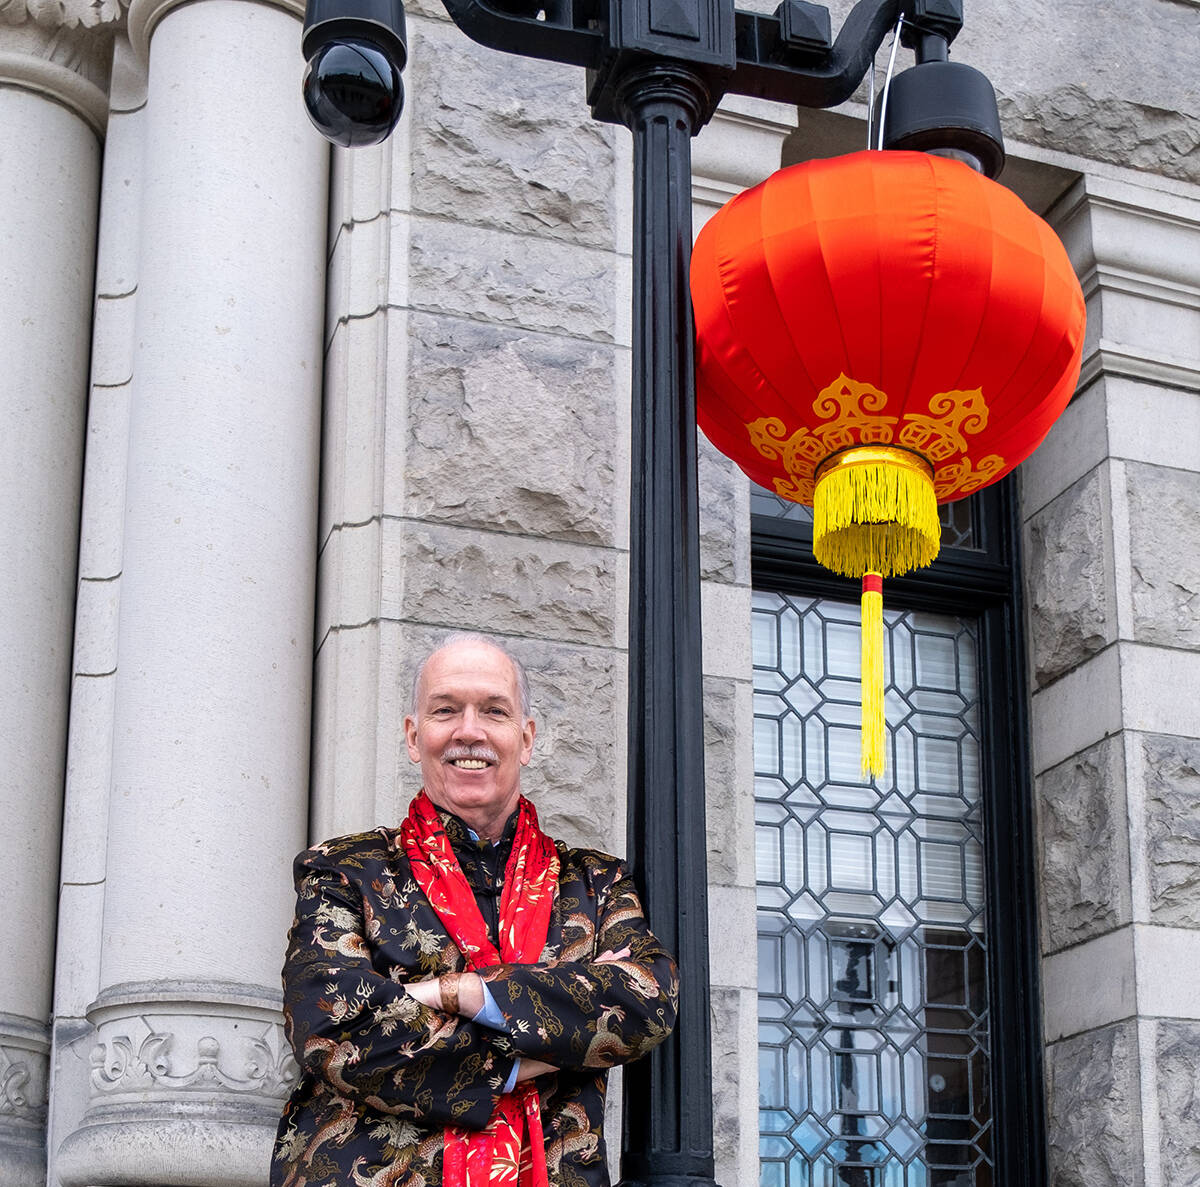 Premier John Horgan makes his first public appearance since completing cancer treatment for Lunar New Year at the B.C. legislature on Tuesday, Feb. 1, 2022. (John Horgan/Twitter)